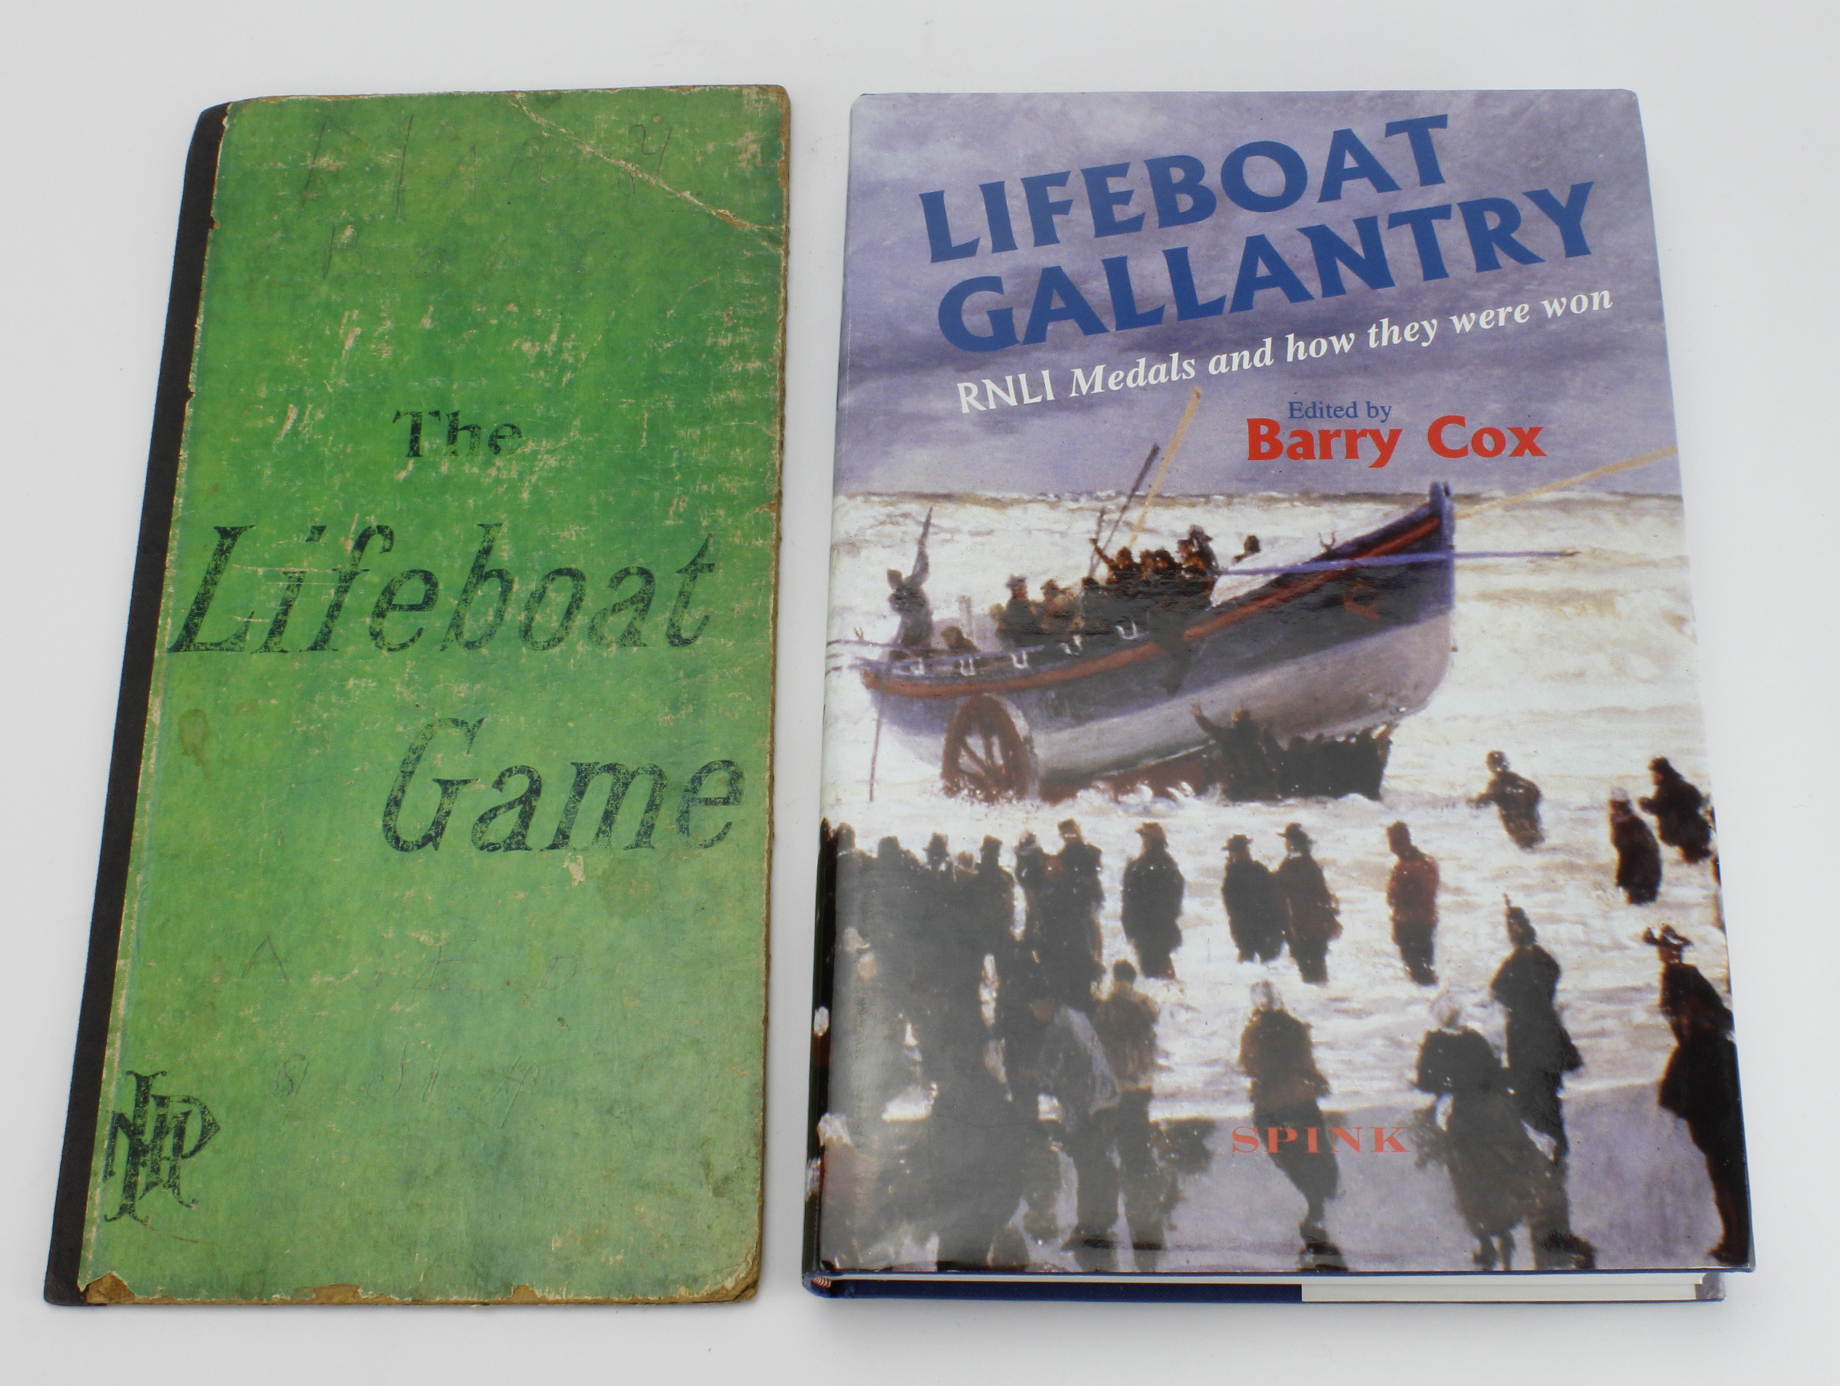 Lifeboat interest the Book "Lifeboat Gallantry, RNLI medals and how they were won" Barry Cox and a